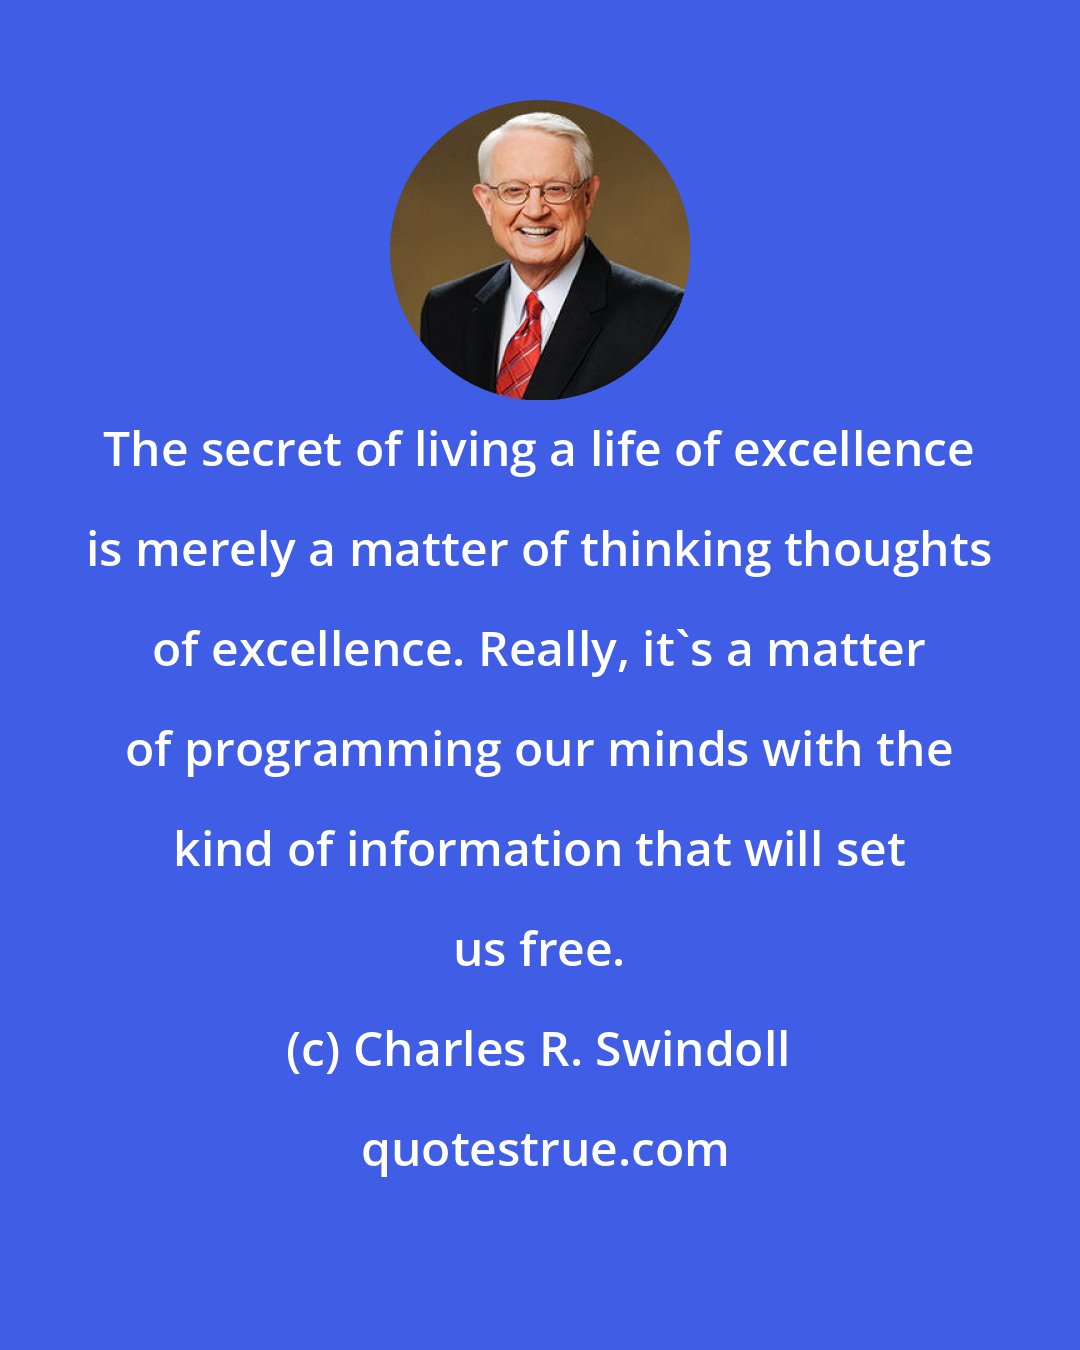 Charles R. Swindoll: The secret of living a life of excellence is merely a matter of thinking thoughts of excellence. Really, it's a matter of programming our minds with the kind of information that will set us free.